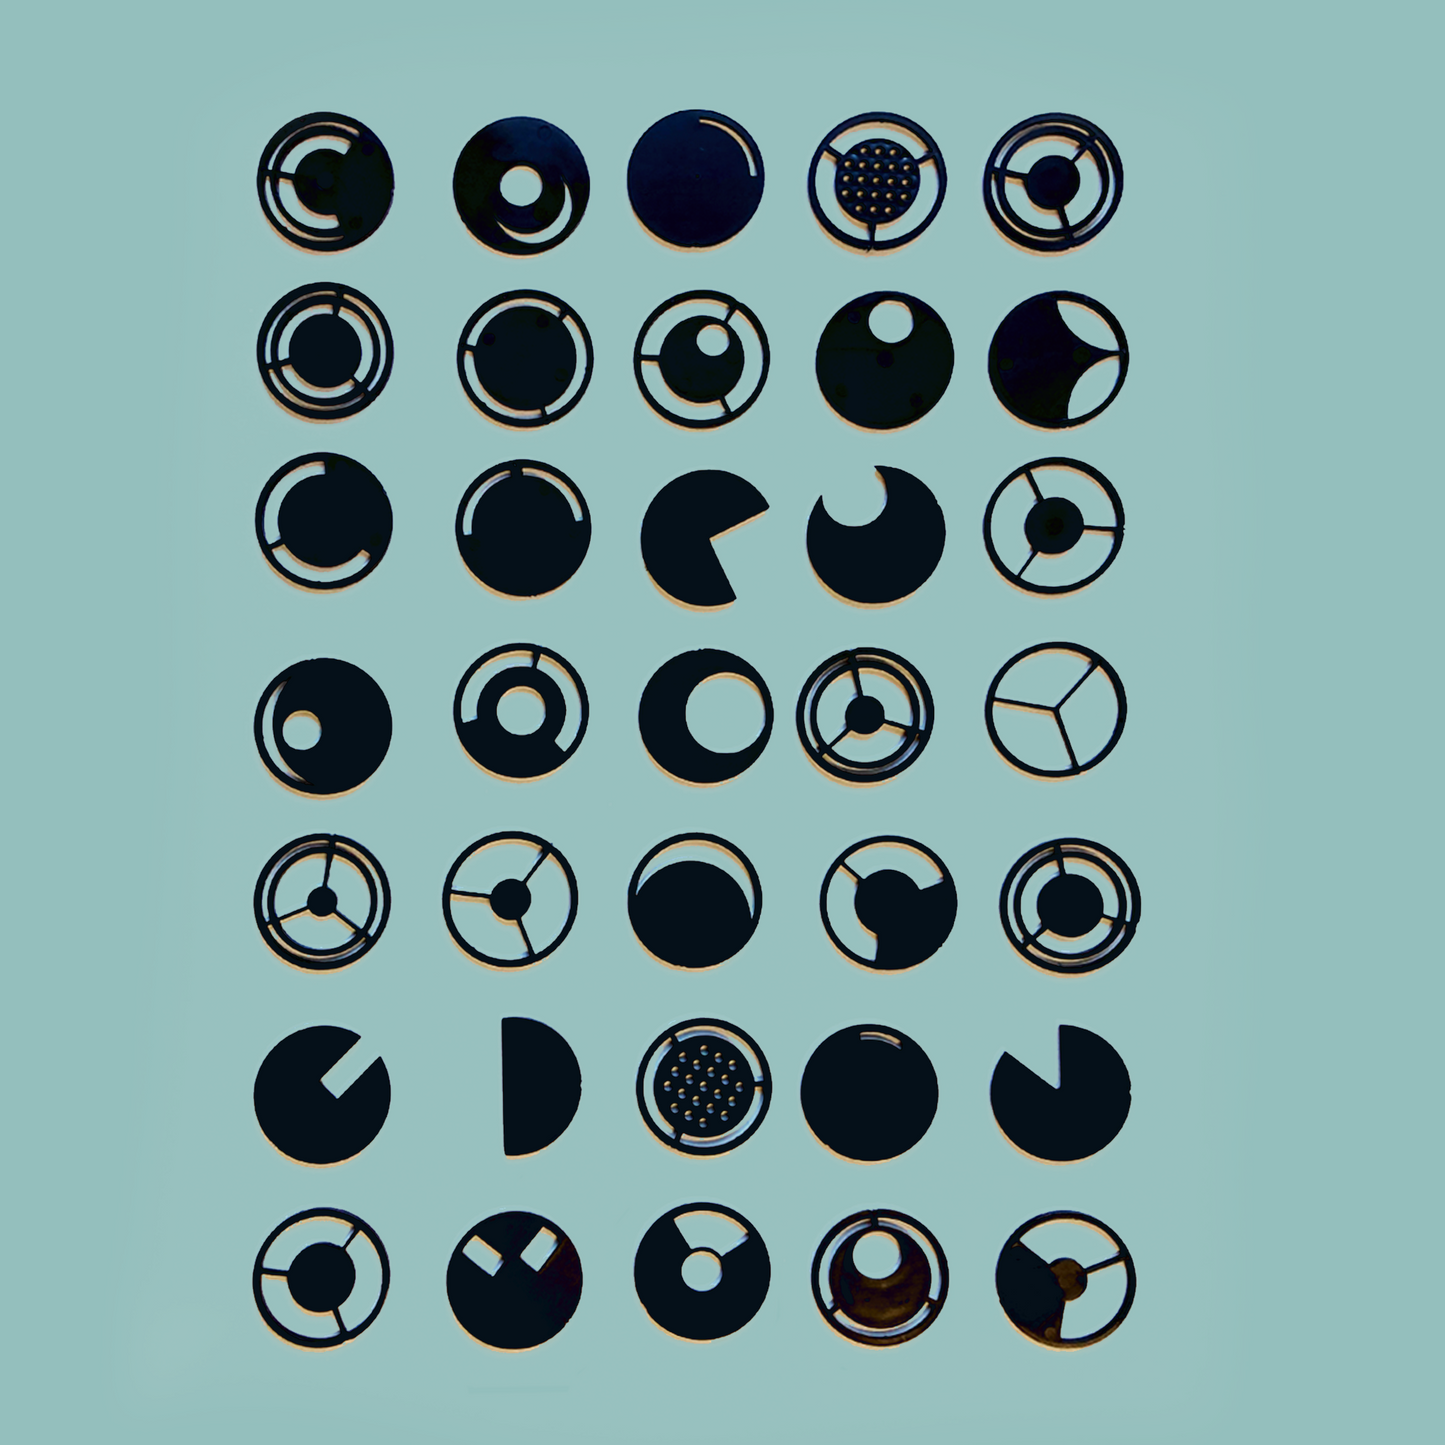 Photograph of various black filters laid out in a grid